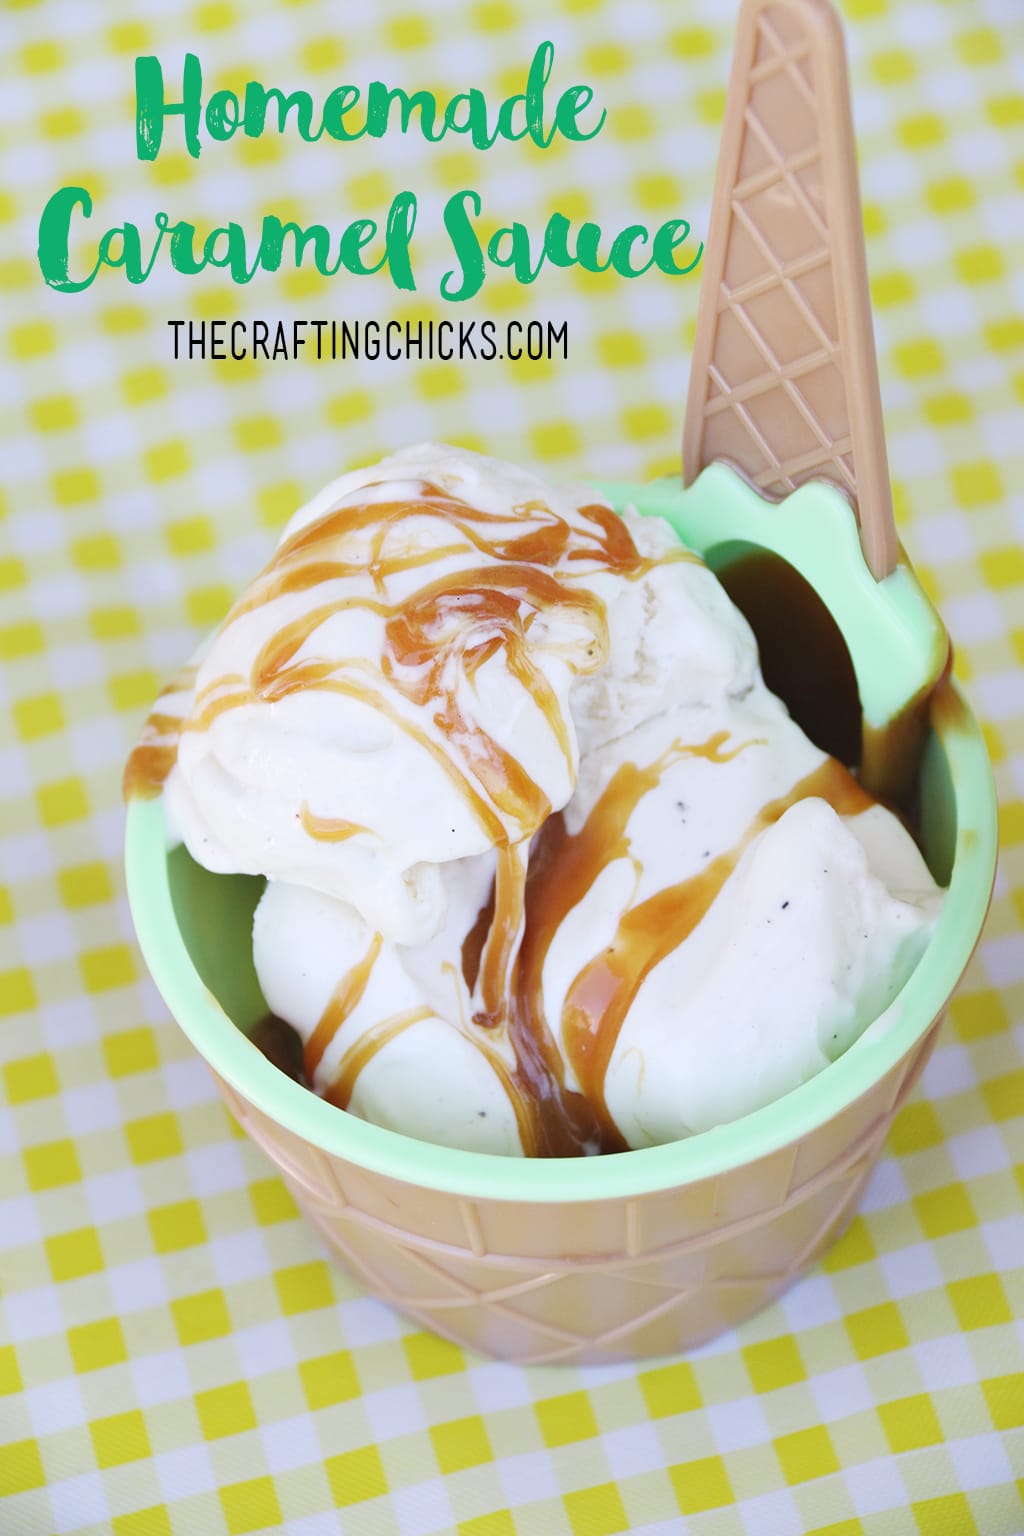 Homemade Caramel Sauce for a yummy topping at an ice cream party!